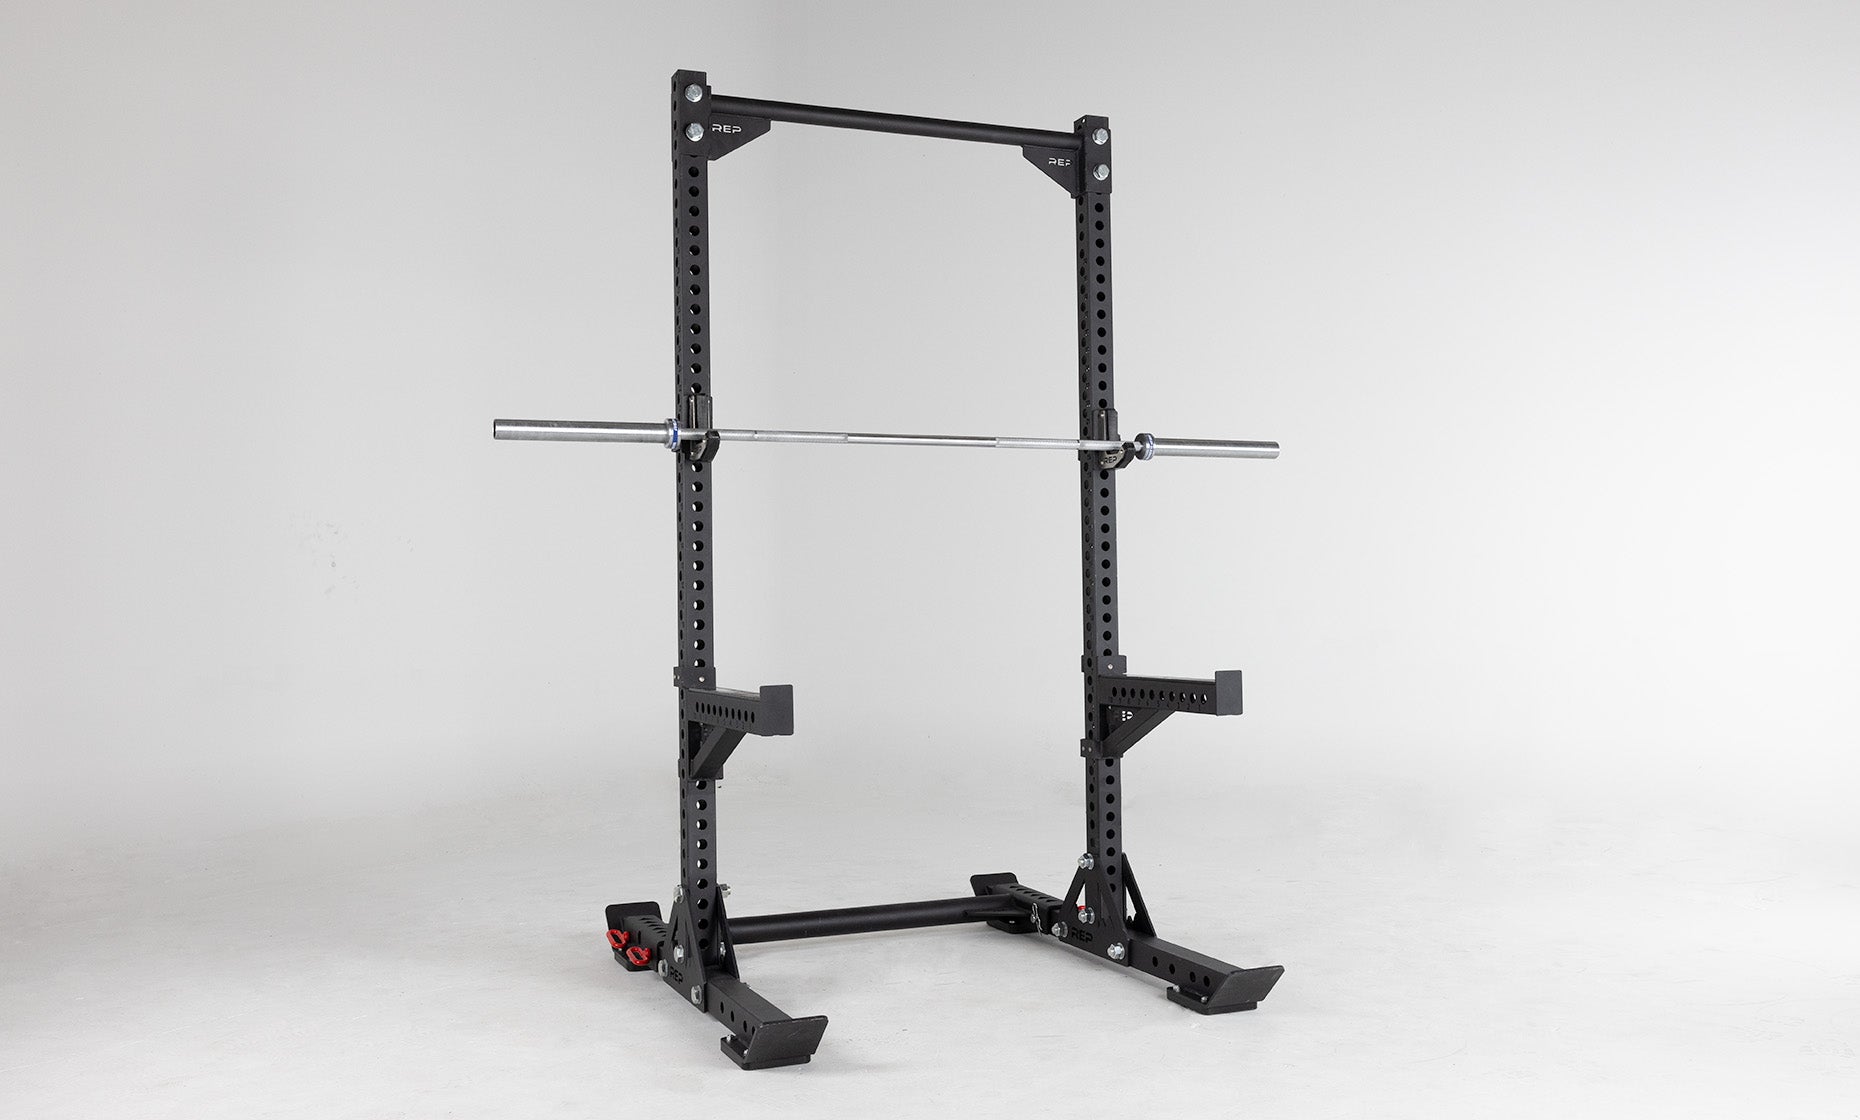 Oxylus Yoke UHMW Liners on Oxylus Yoke With Pull-Up Bar, Spotter Arms, and J-Cups Holding a Barbell